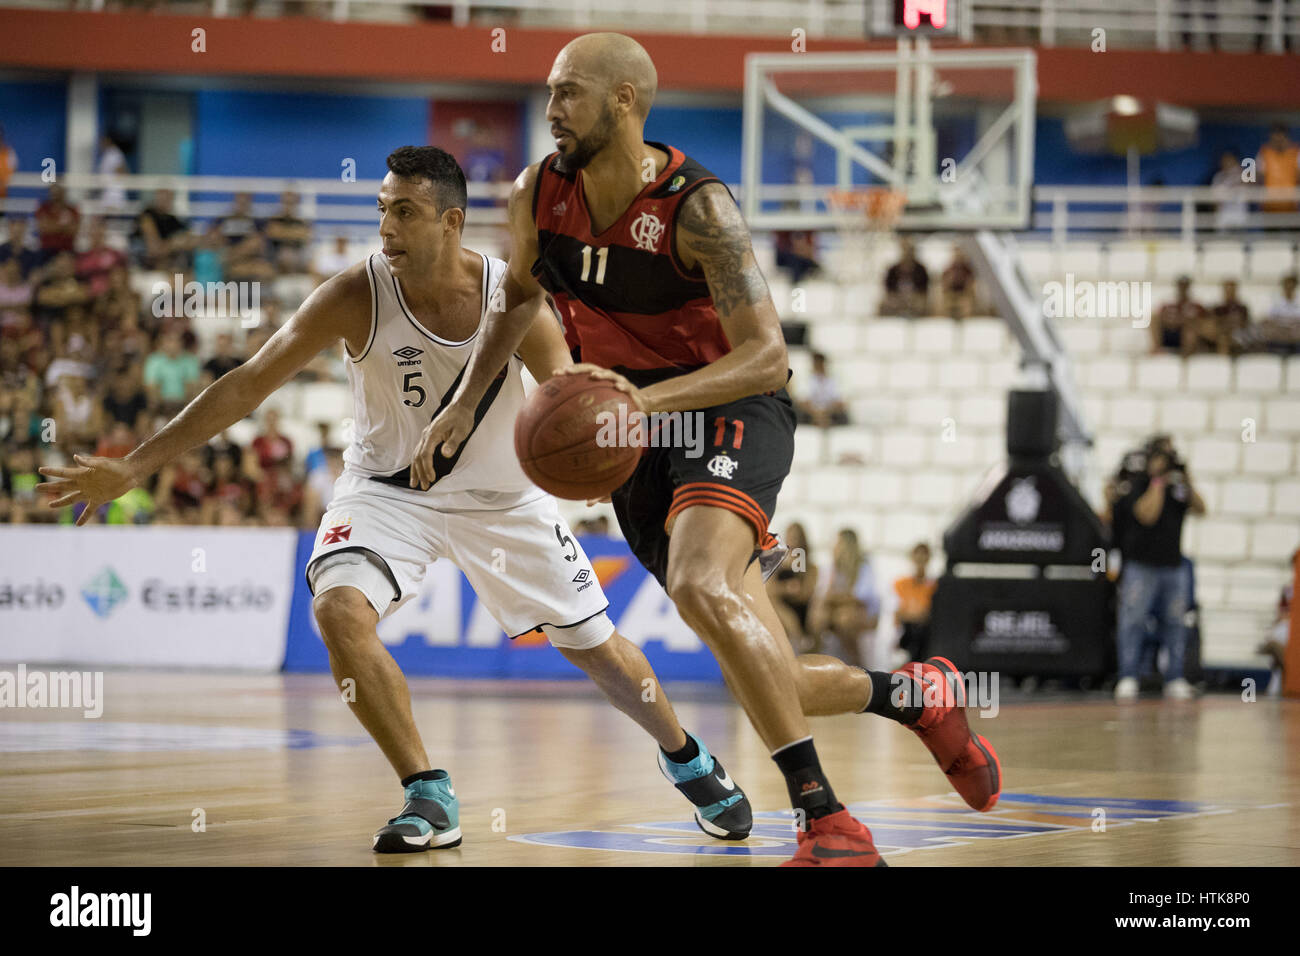 Manaus, Brazil. 11th Mar, 2017. Marquinhos Vasco match valid for the 25th round of the New Basketball Brazil held in Arena Amadeu Teixeira in Manaus, AM. Credit: Emanuel Pires/FotoArena/Alamy Live News Stock Photo